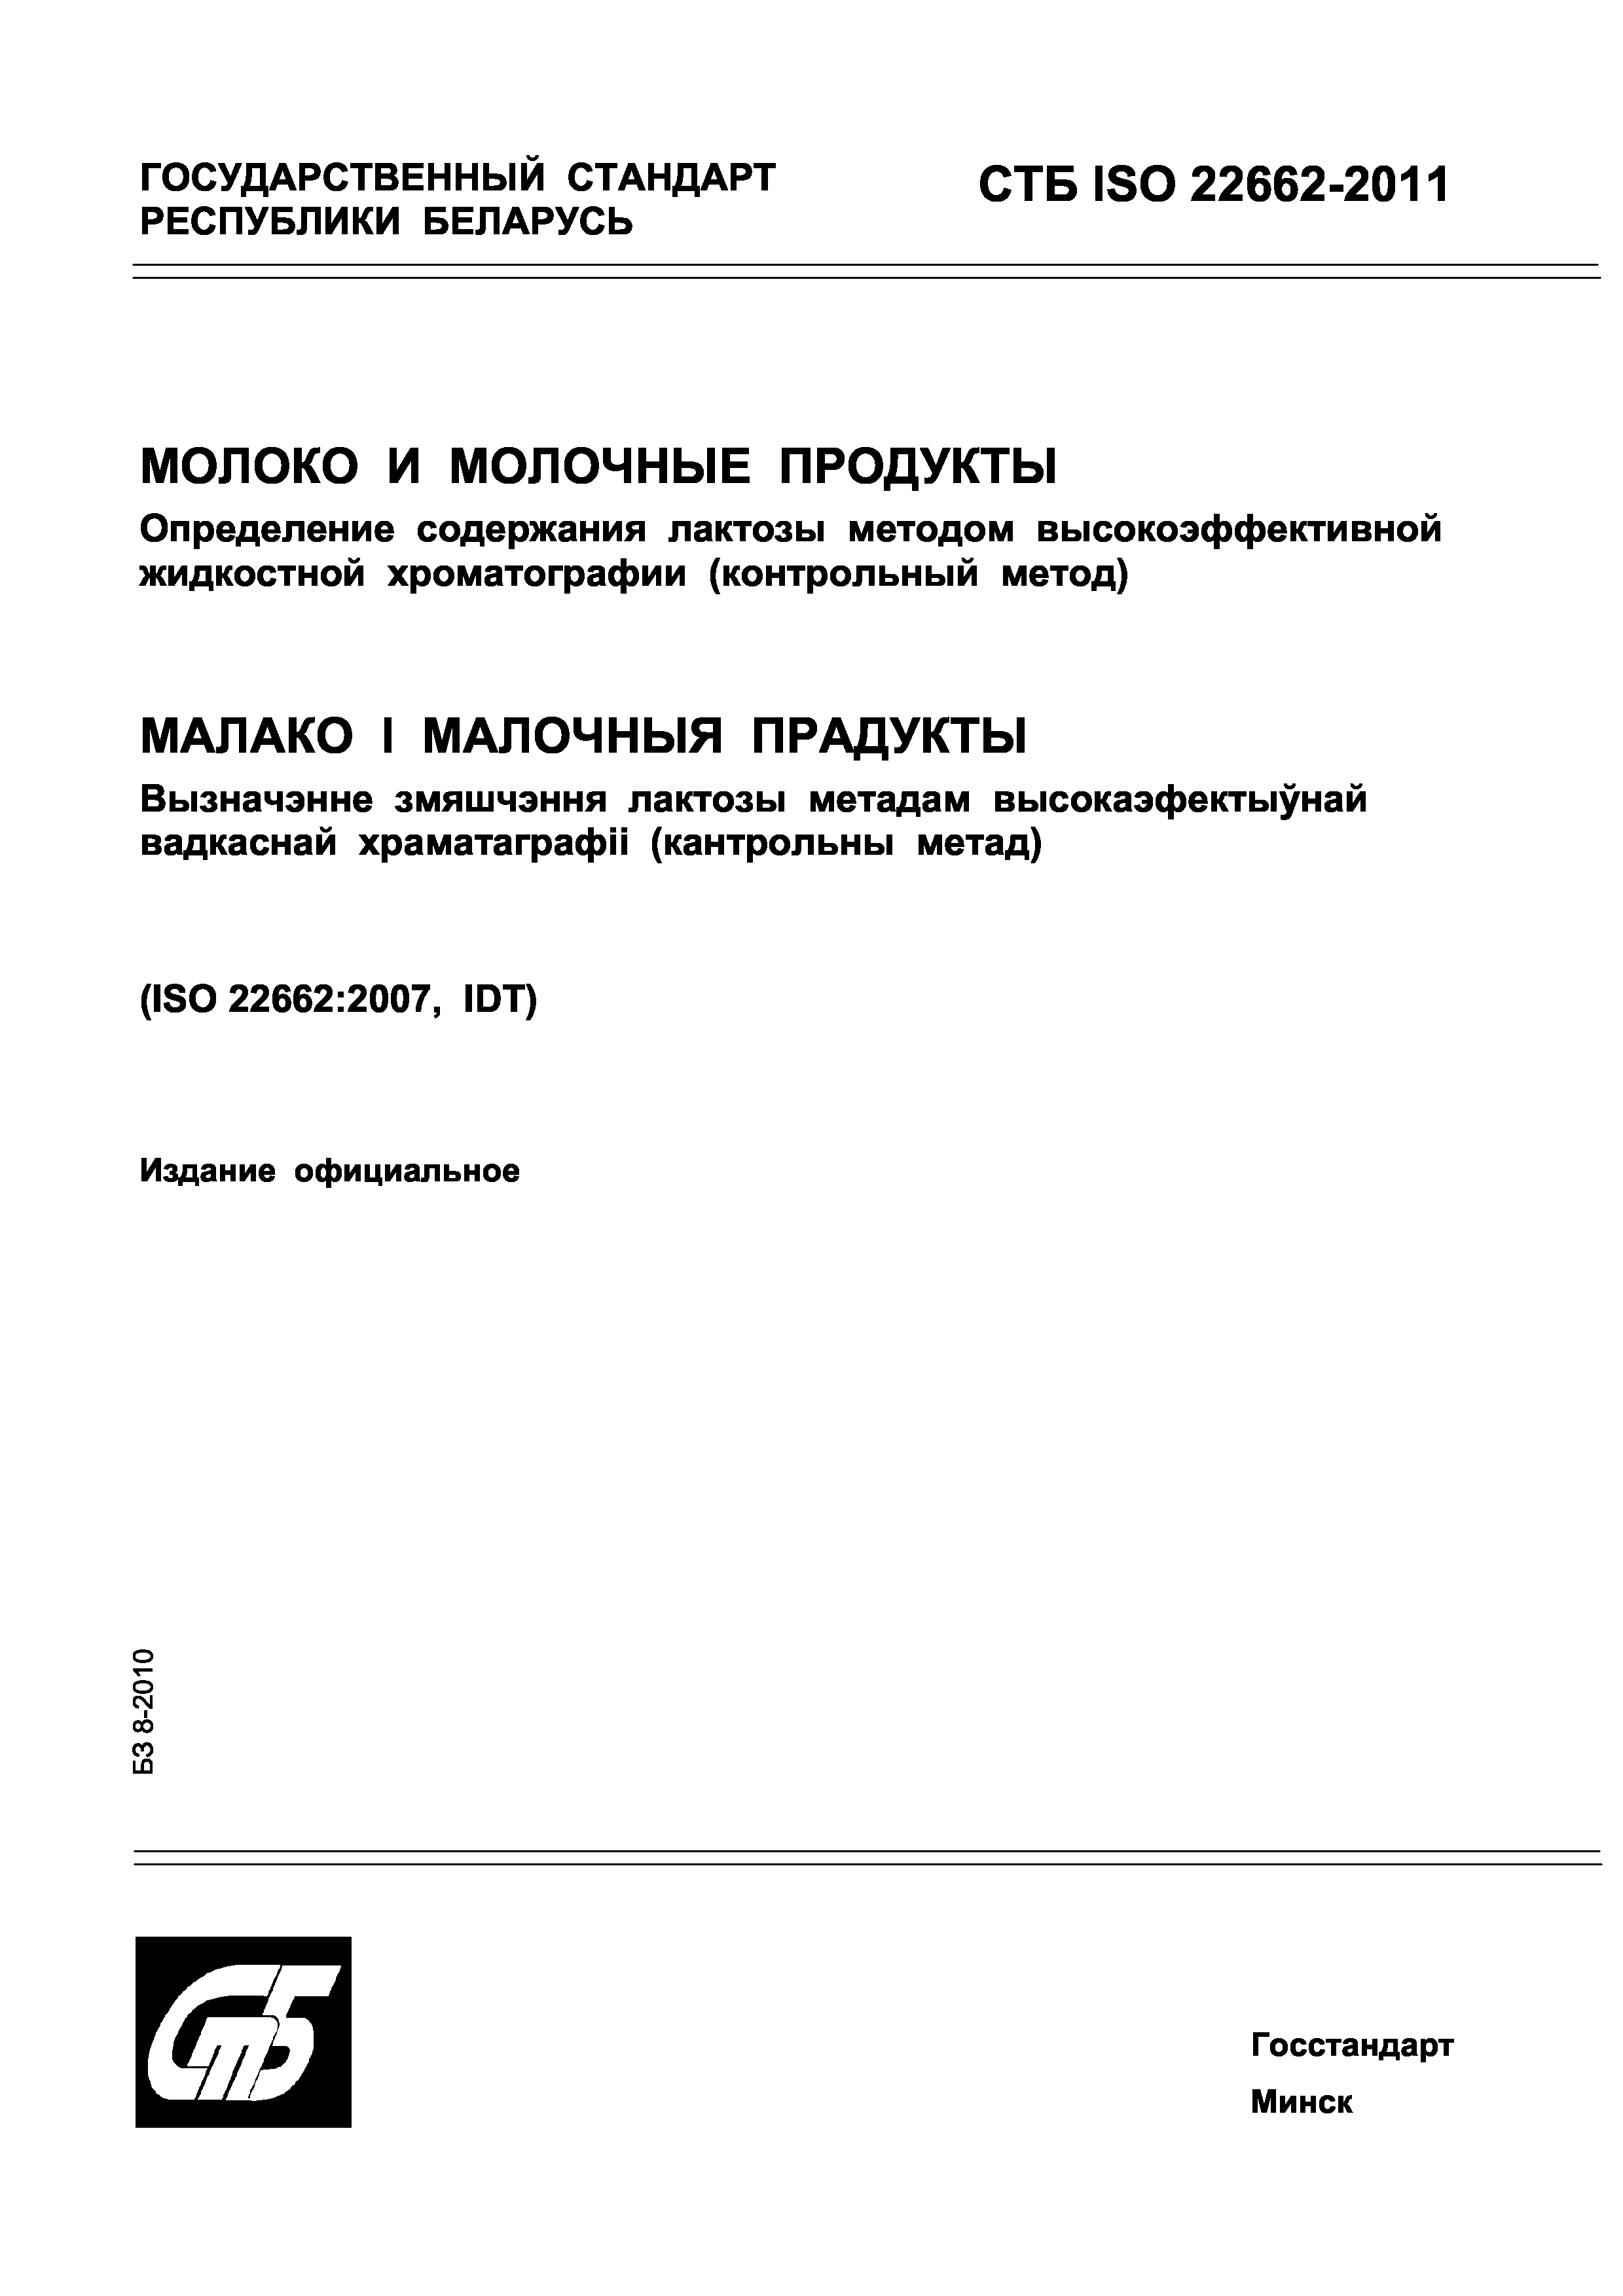 СТБ ISO 22662-2011